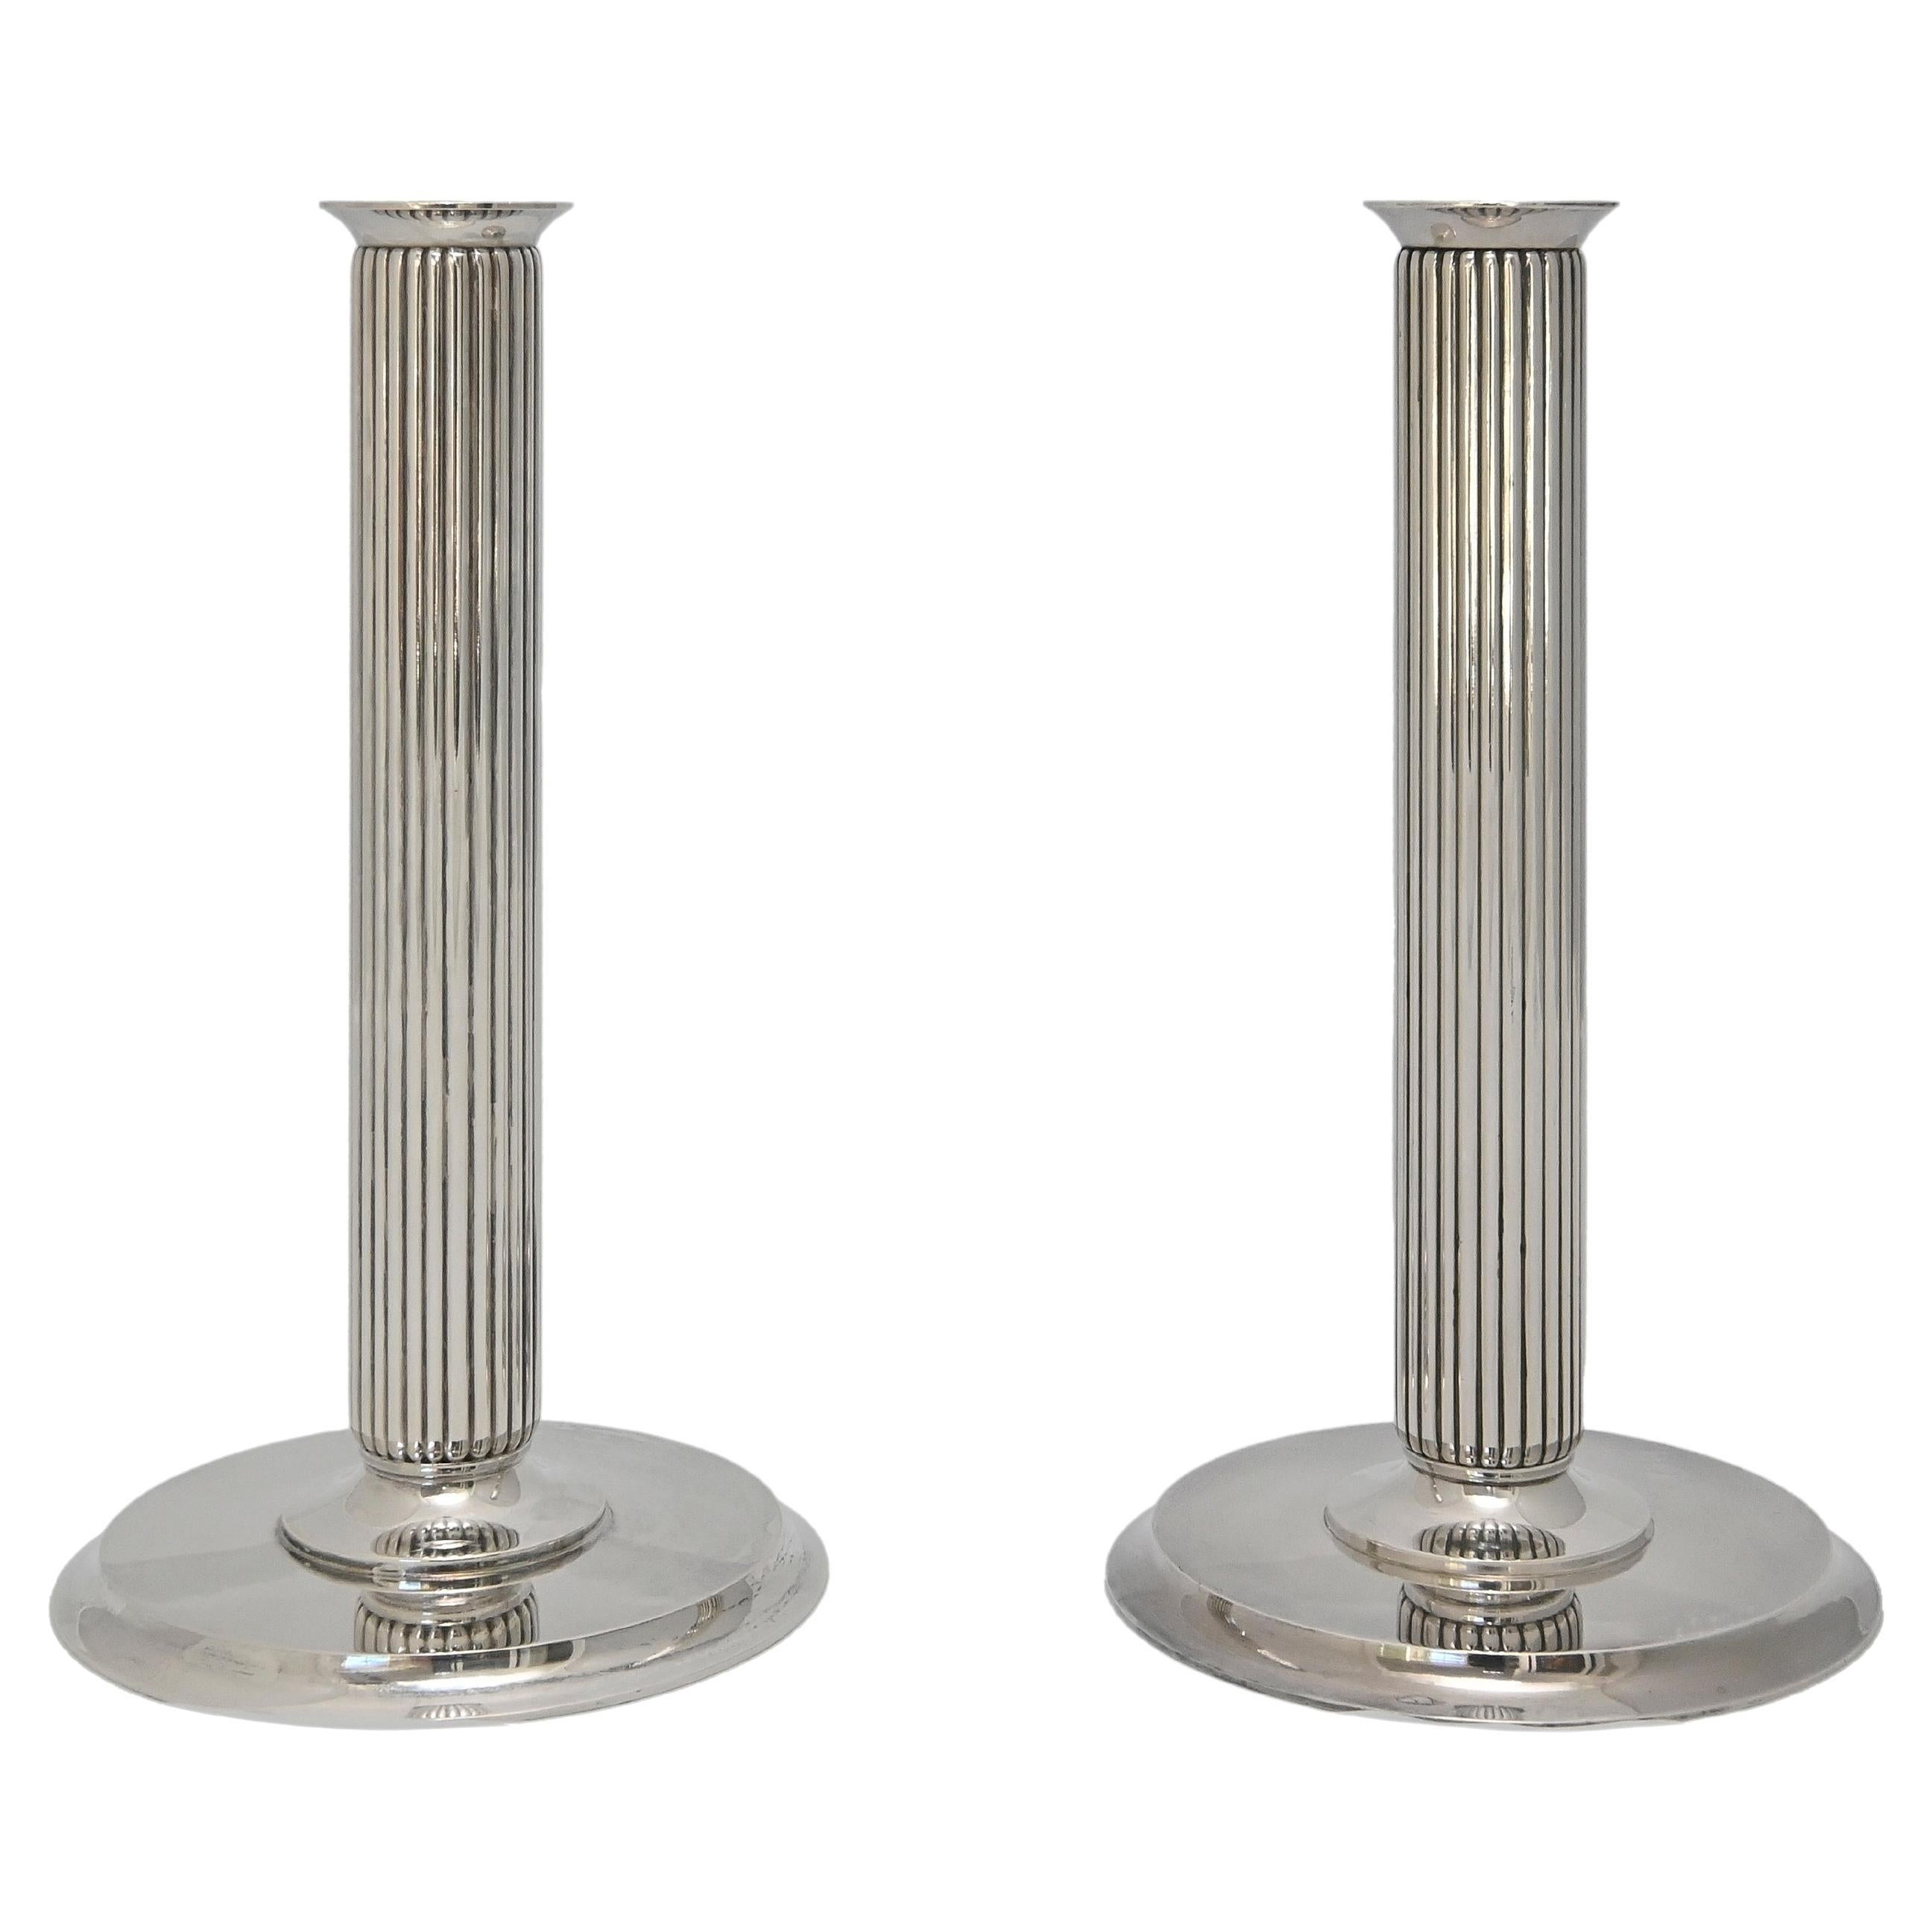 Two Pairs  of candlesticks 855 E by Georg Jensen Denmark , design Prince Sigvard Bernadotte  
The straight design and particular style, without any other decorations than the lines of the ribs shows Sigvard Bernadotte as one of the first modern